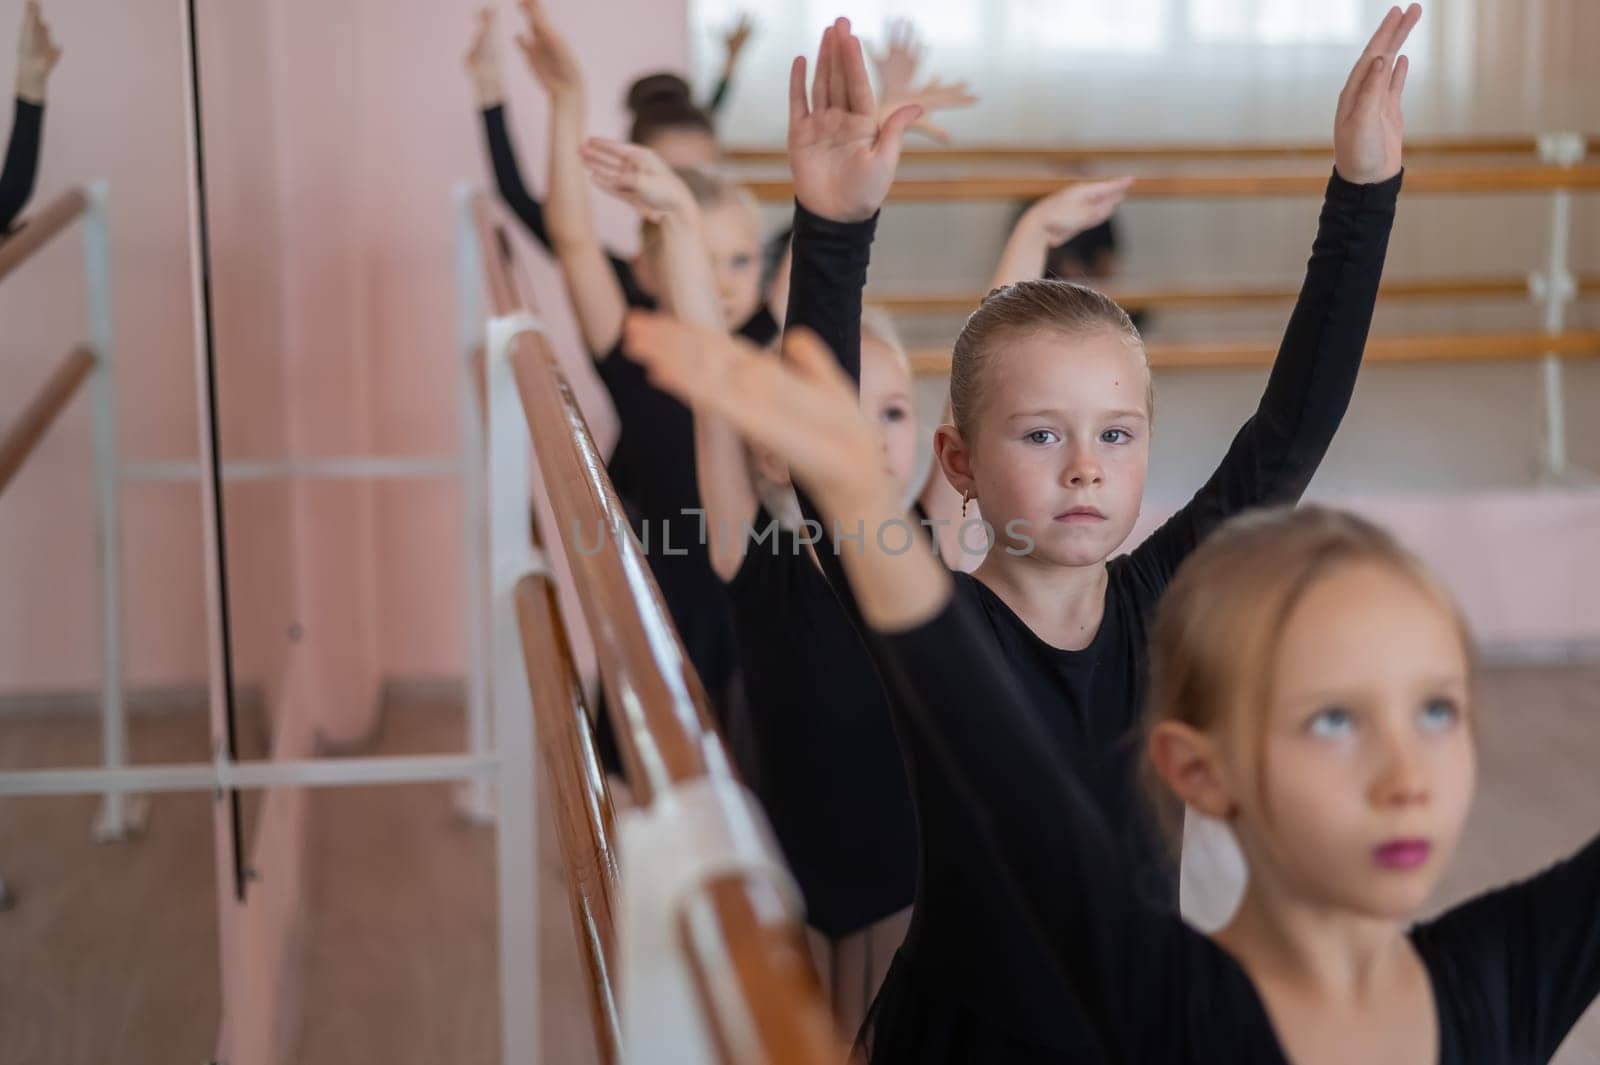 Cute little girls in black swimsuits and tutu do ballet at the barre. by mrwed54